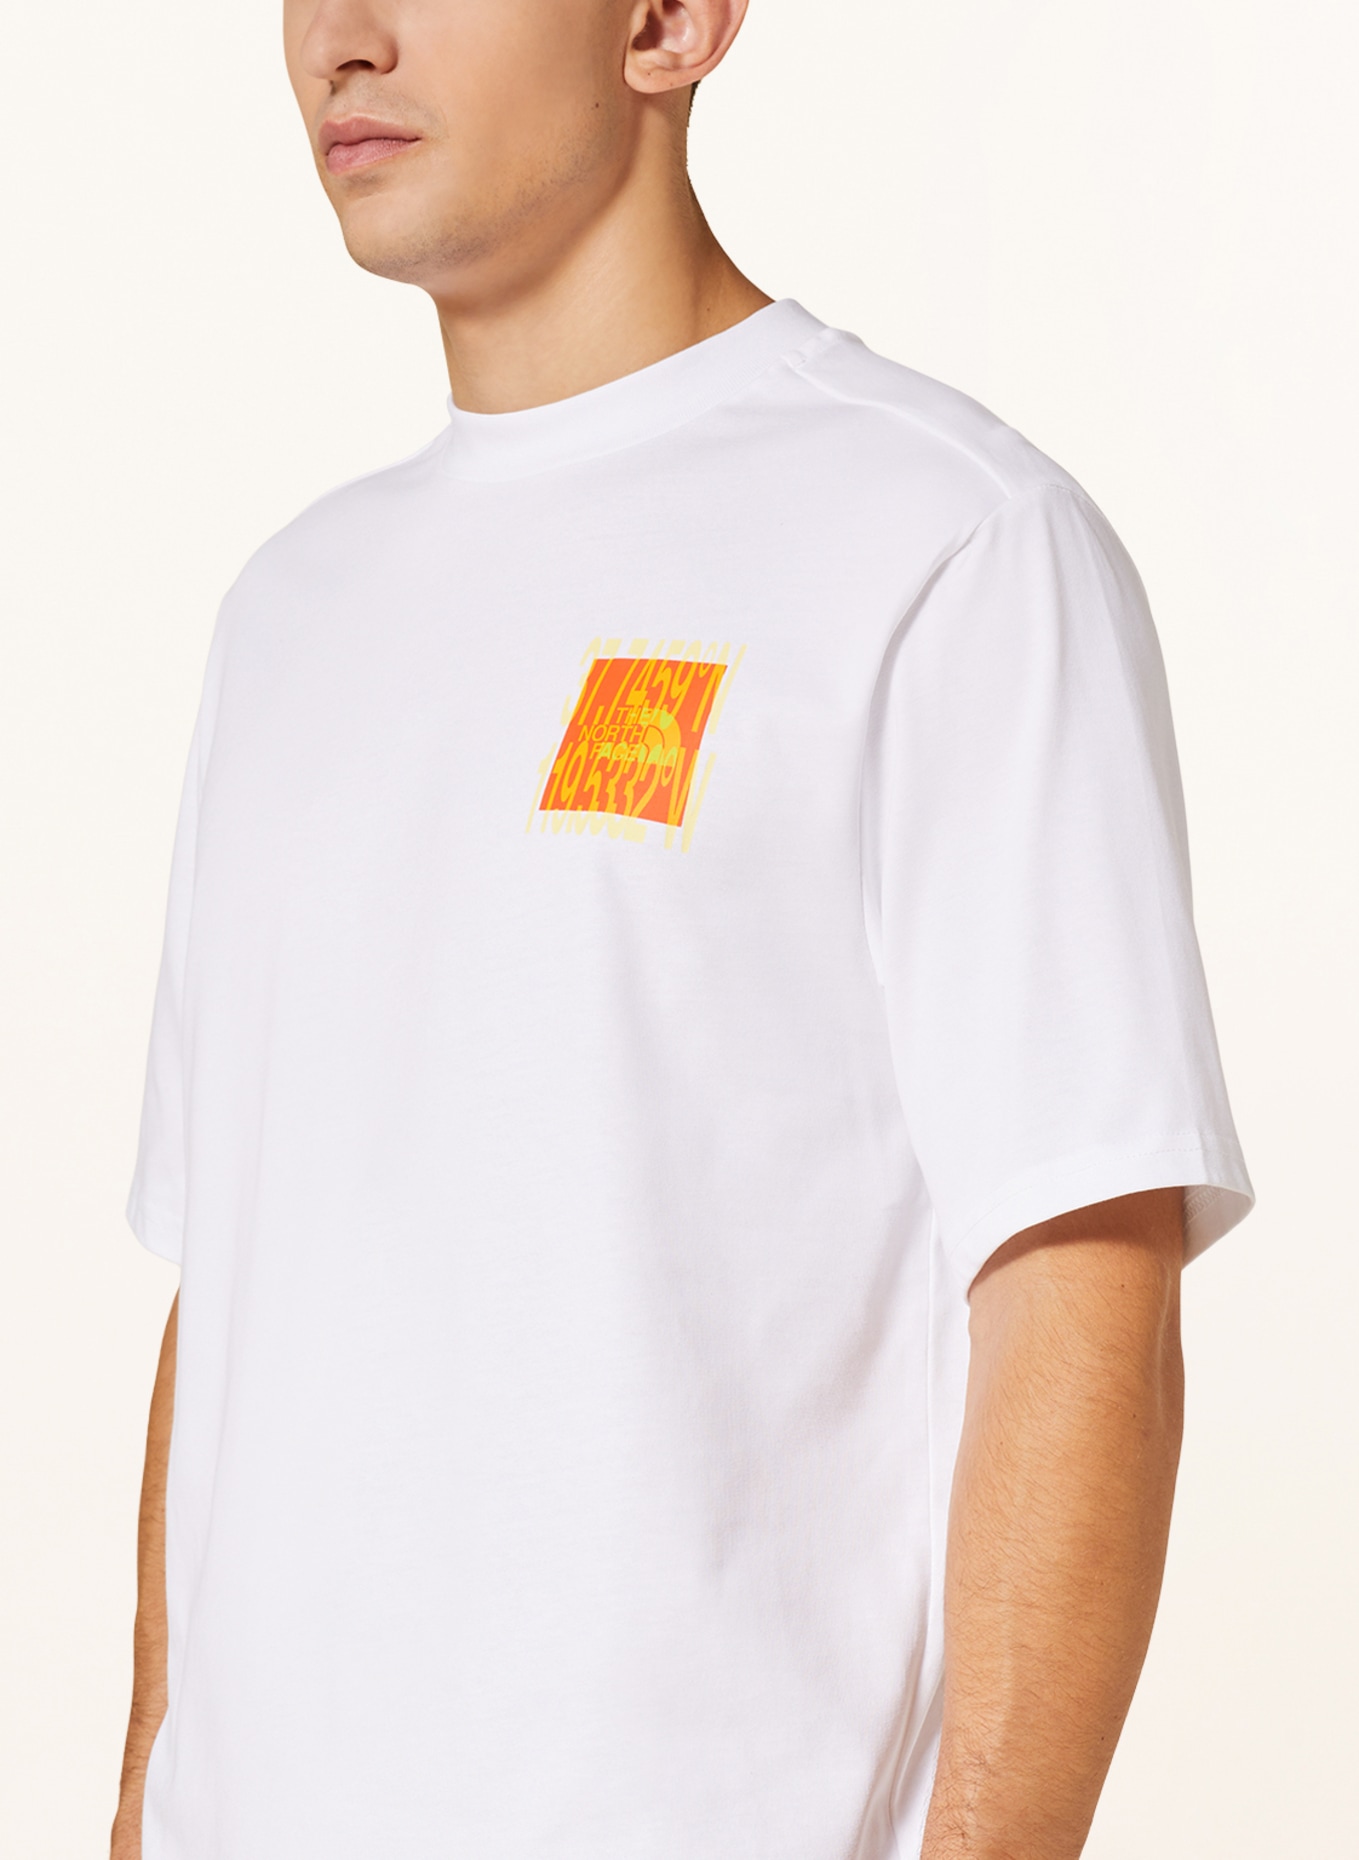 THE NORTH FACE T-shirt, Color: WHITE (Image 4)